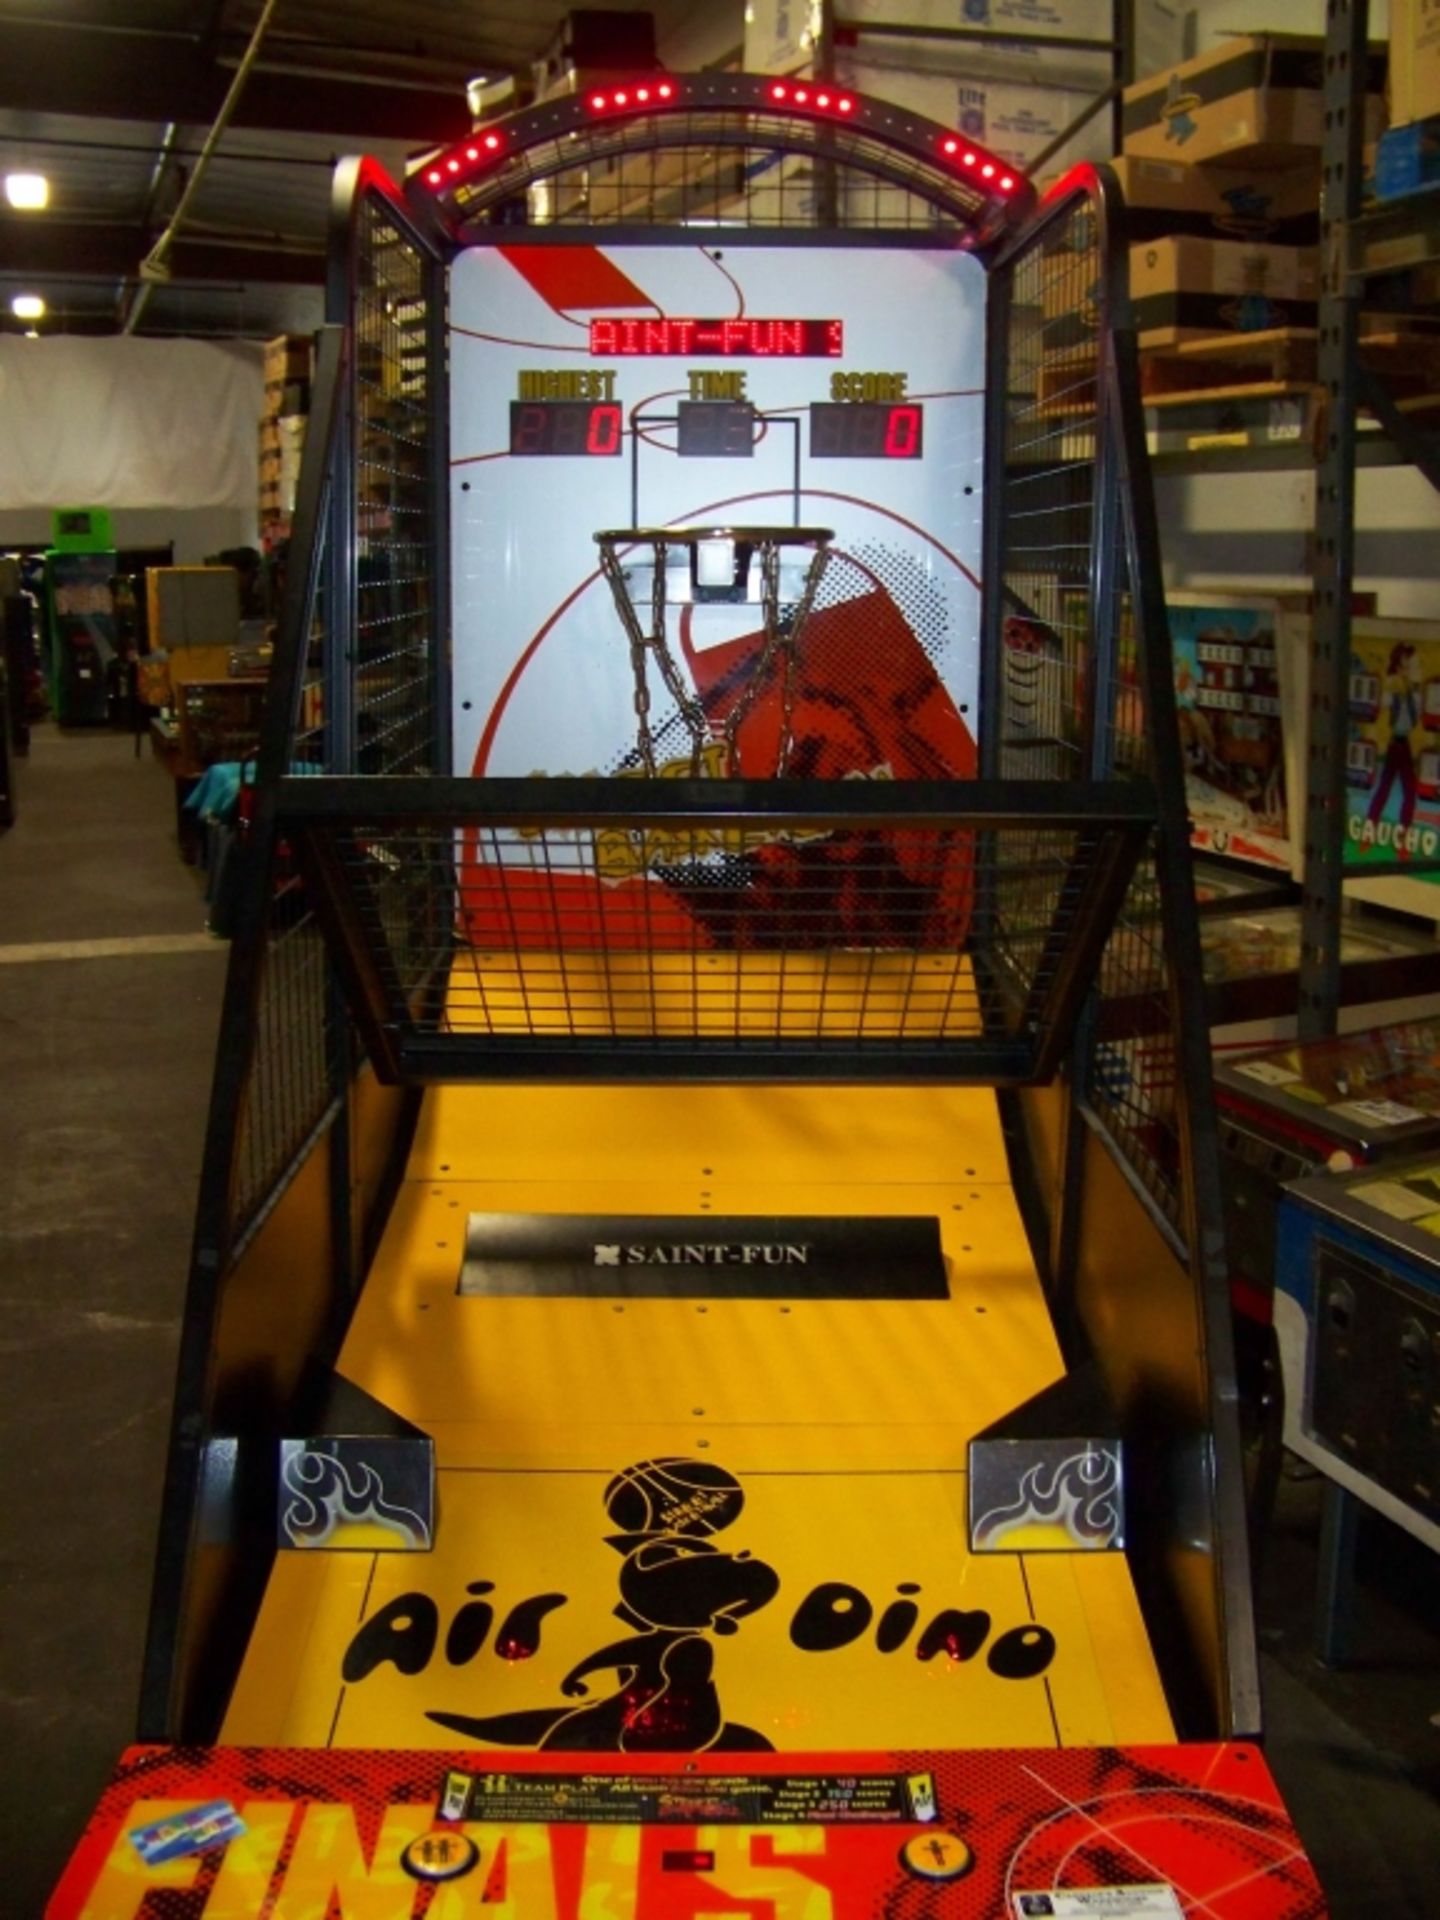 STREET BASKETBALL SPORTS REDEMPTION ARCADE GAME Item is in used condition. Evidence of wear and - Image 5 of 7